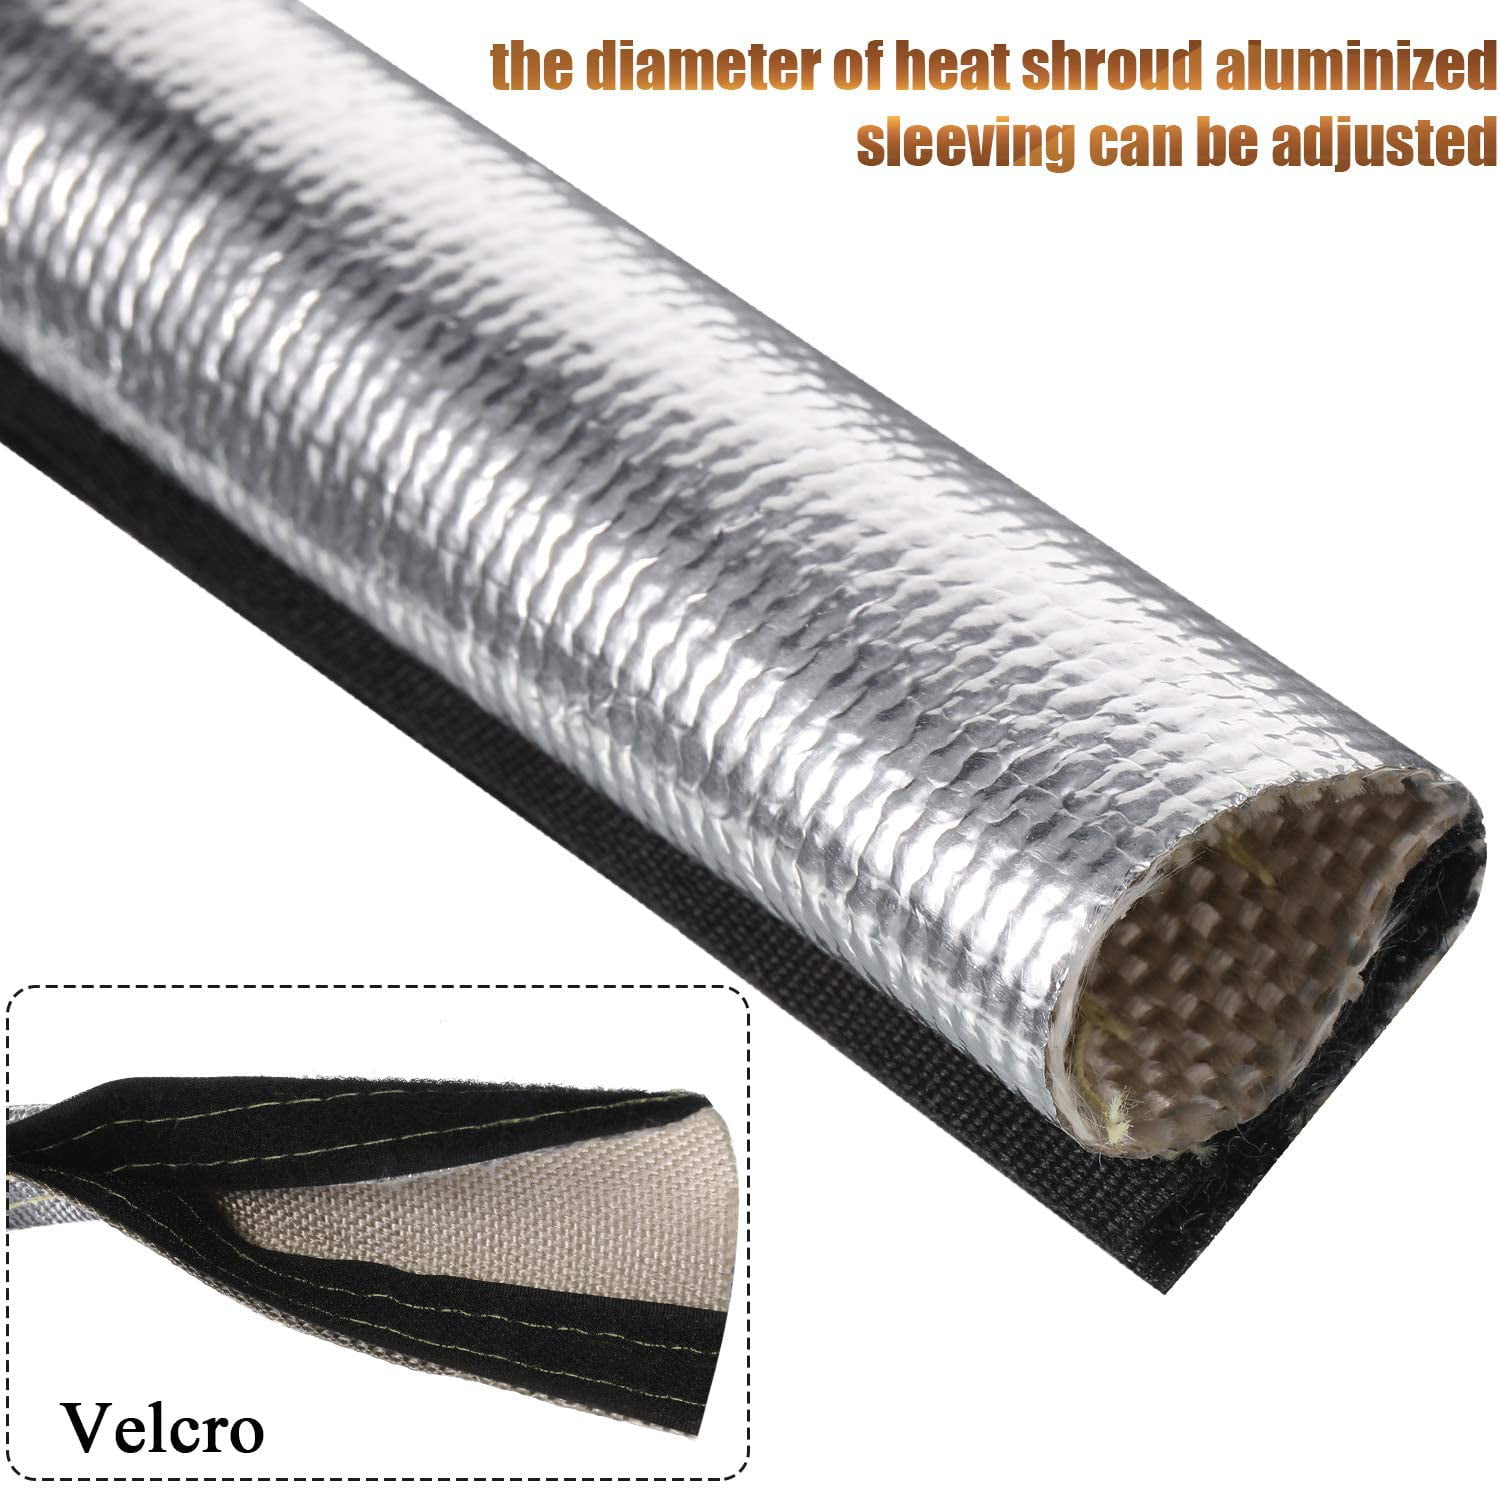 6.5 Feet Heat Shroud Aluminized Sleeving Heat Shield Protection Barrier Covers with 20 Pieces 0.5 Feet Stainless Steel Cable Metal Zip Ties 